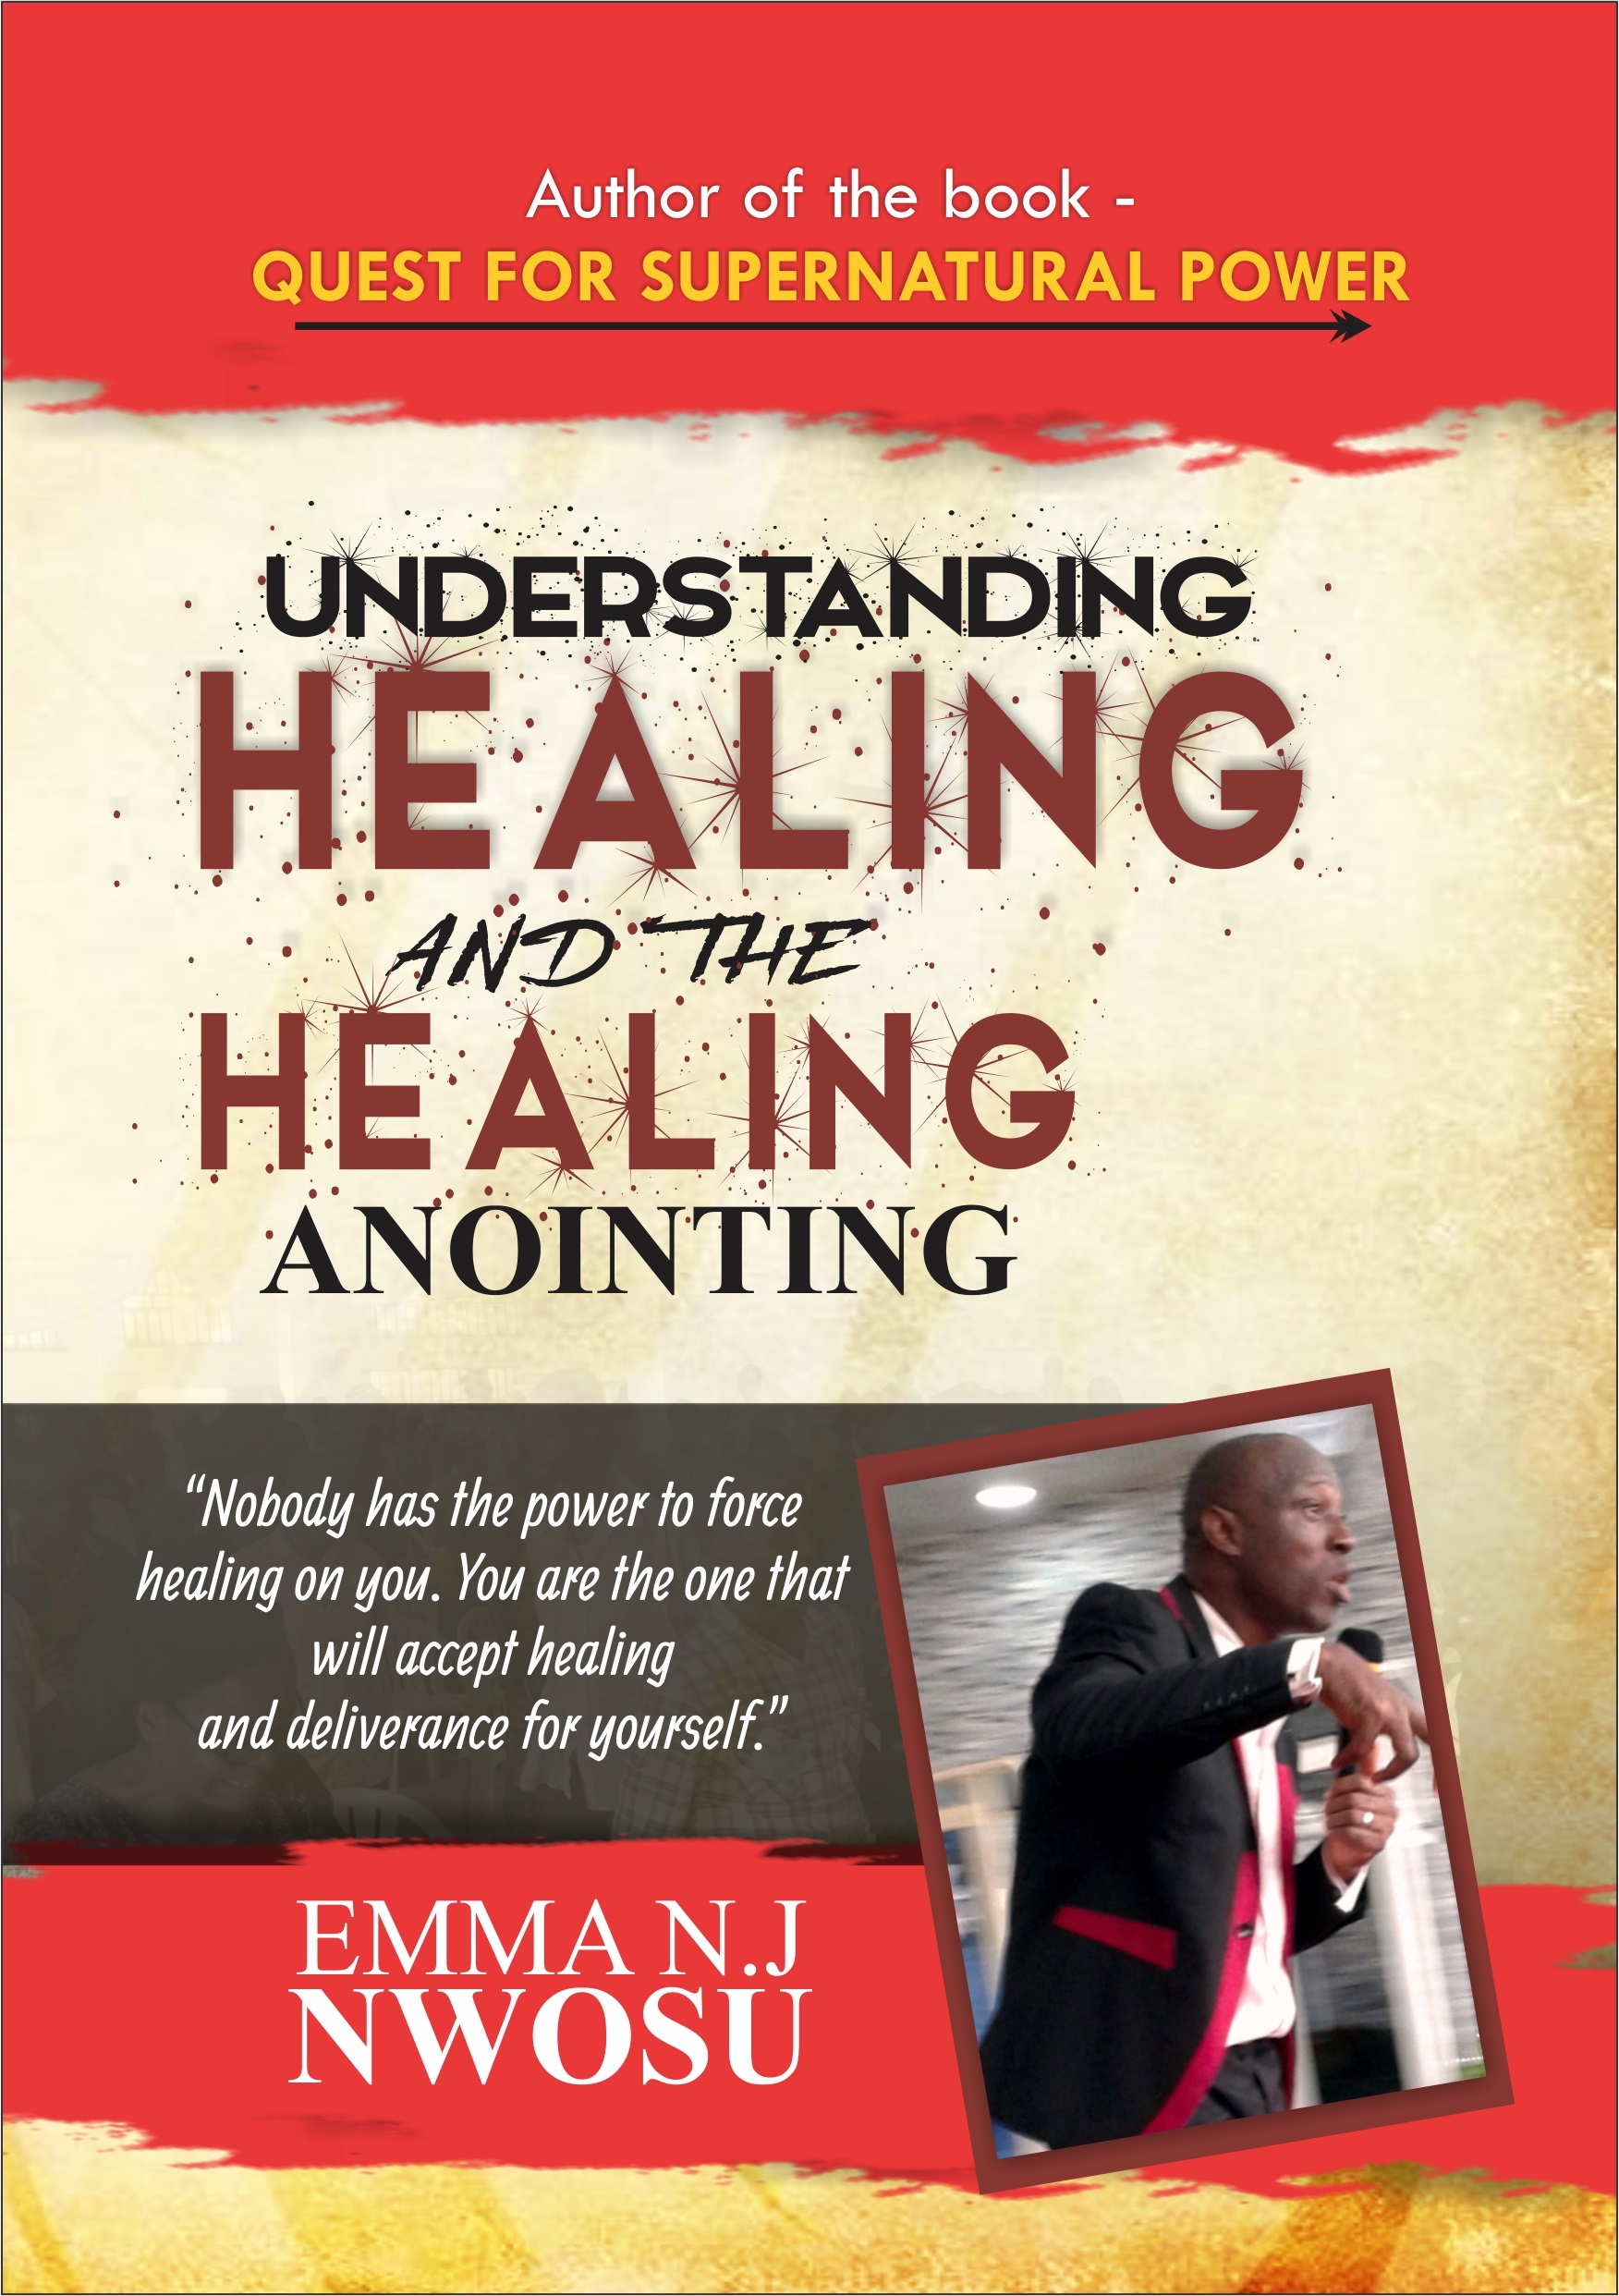 HEALING ANOINTING